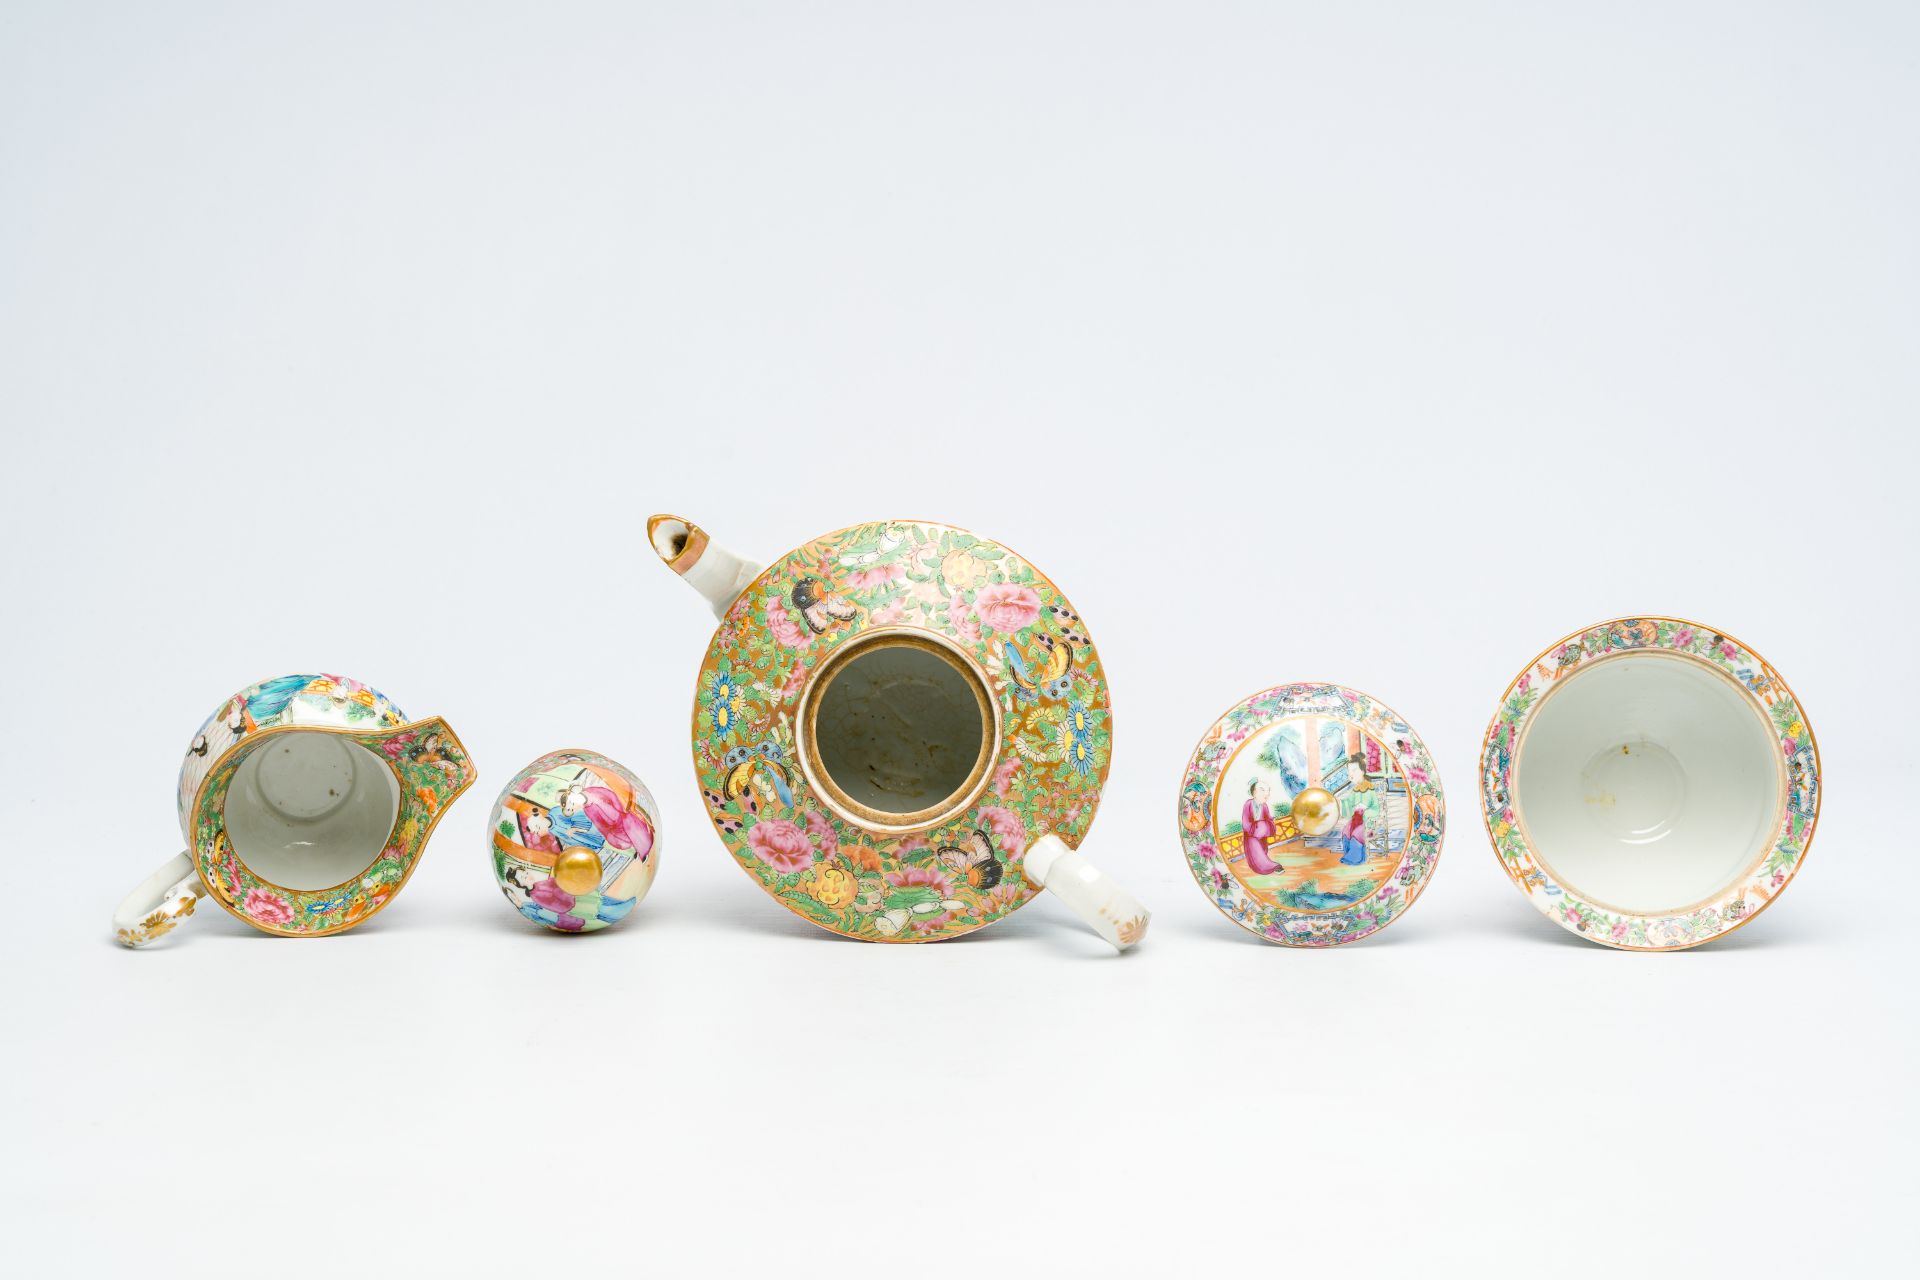 A Chinese Canton famille rose three-part tea set with palace scenes, 19th C. - Image 6 of 7